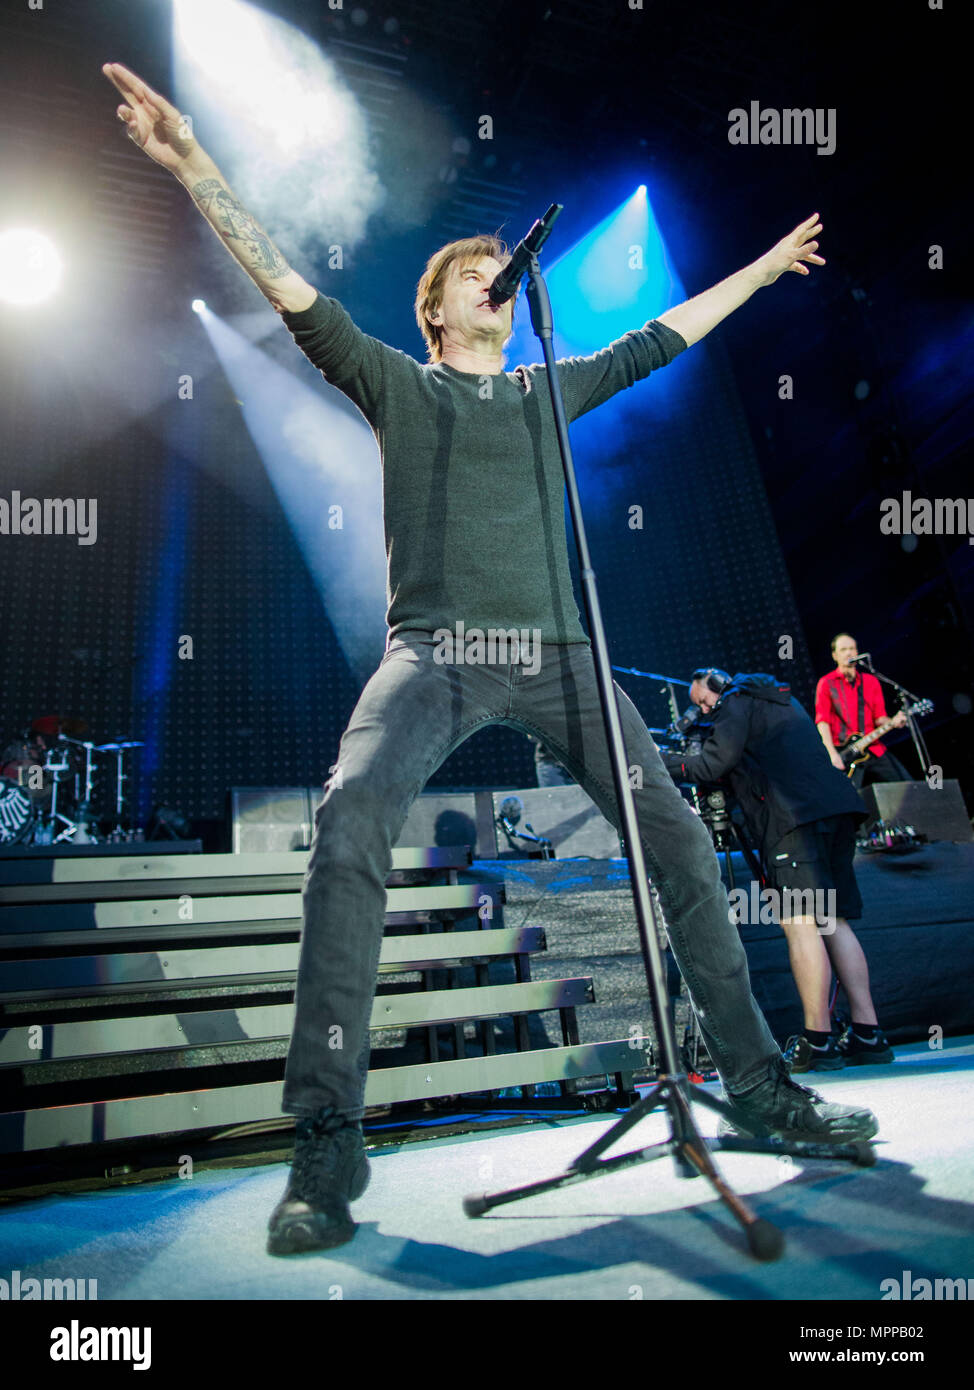 24 May 2018, Germany, Essen: Campino, singer with the band "Die Toten Hosen",  performing on stage. The concert is the first of the "Laune der Natour"  tour, which is set to run